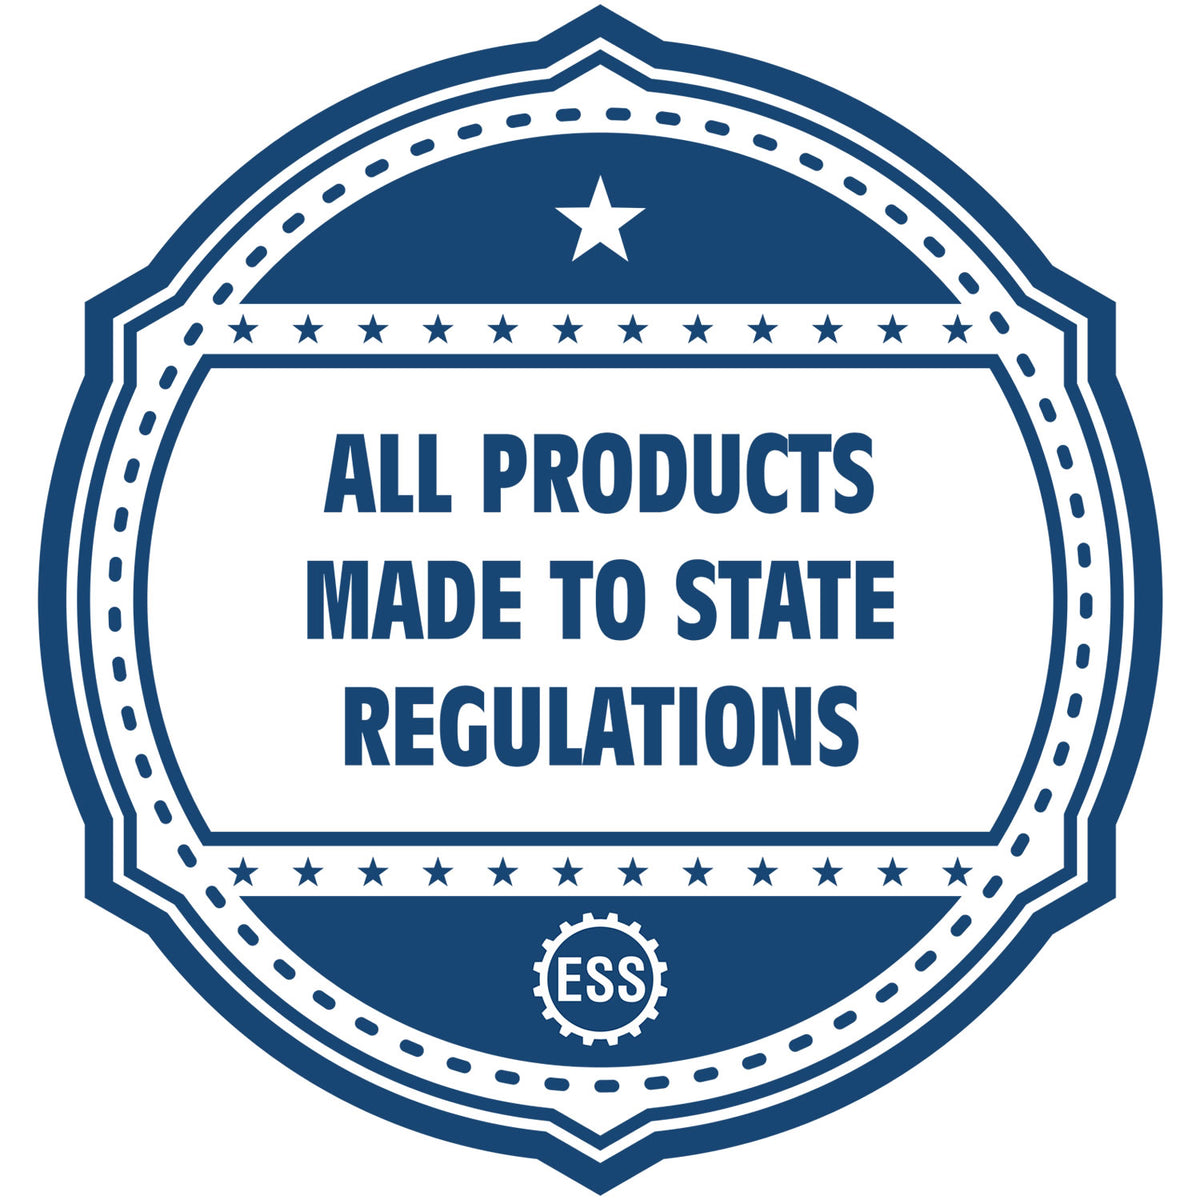 An icon or badge element for the Self-Inking State Seal West Virginia Notary Stamp showing that this product is made in compliance with state regulations.